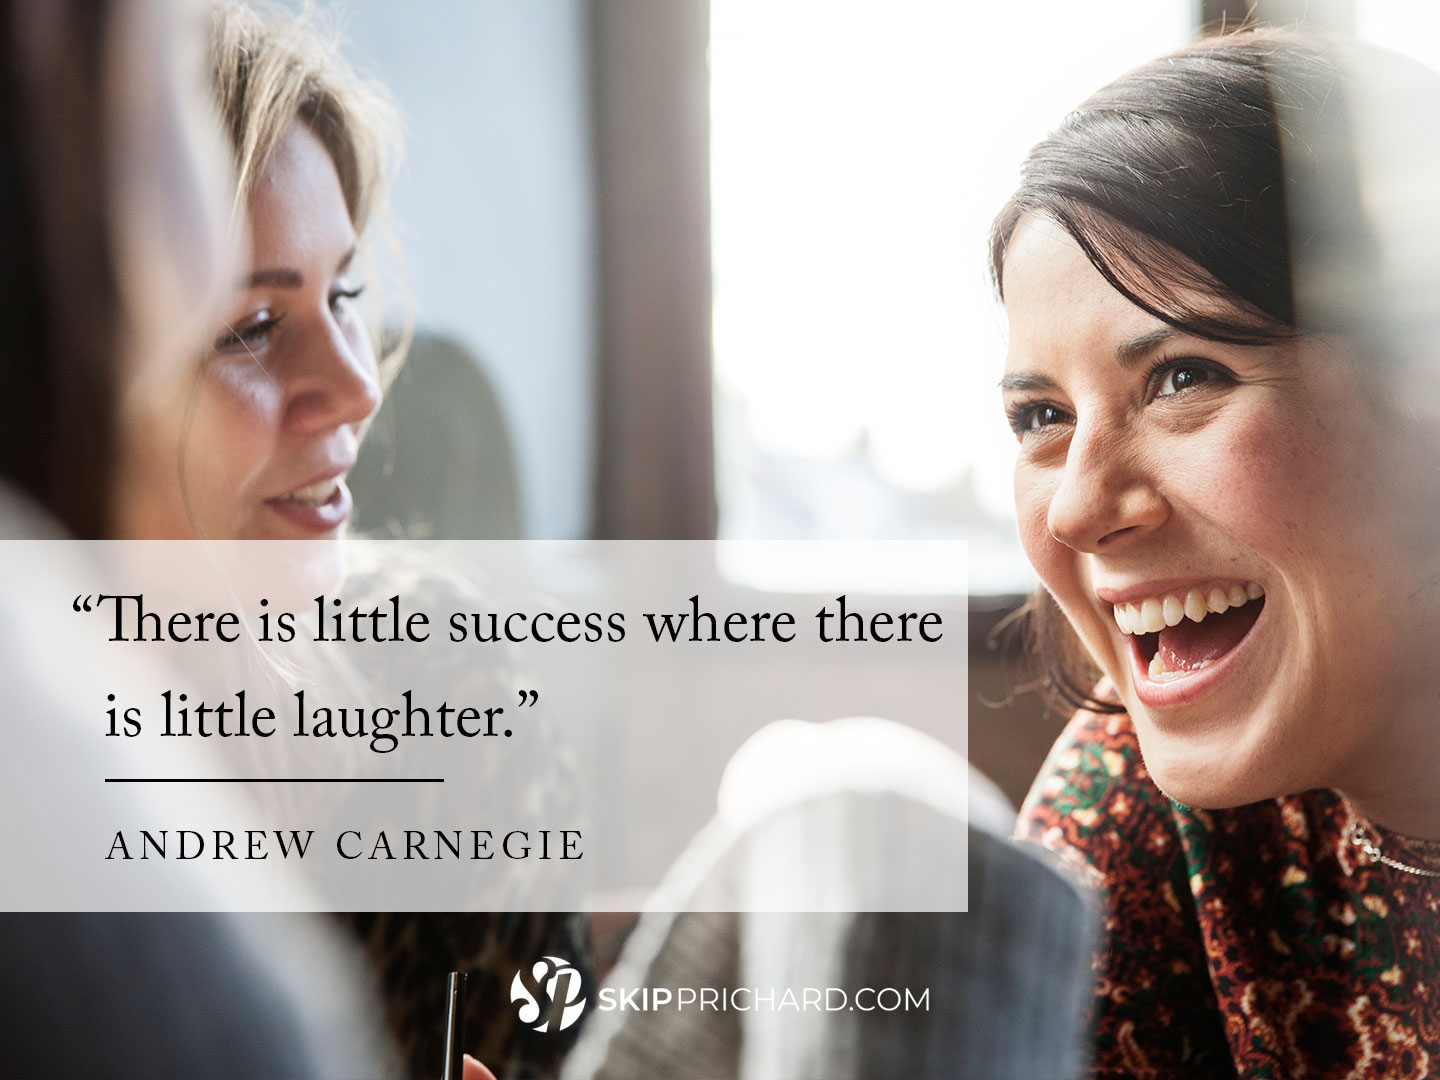 “There is little success where there is little laughter.”